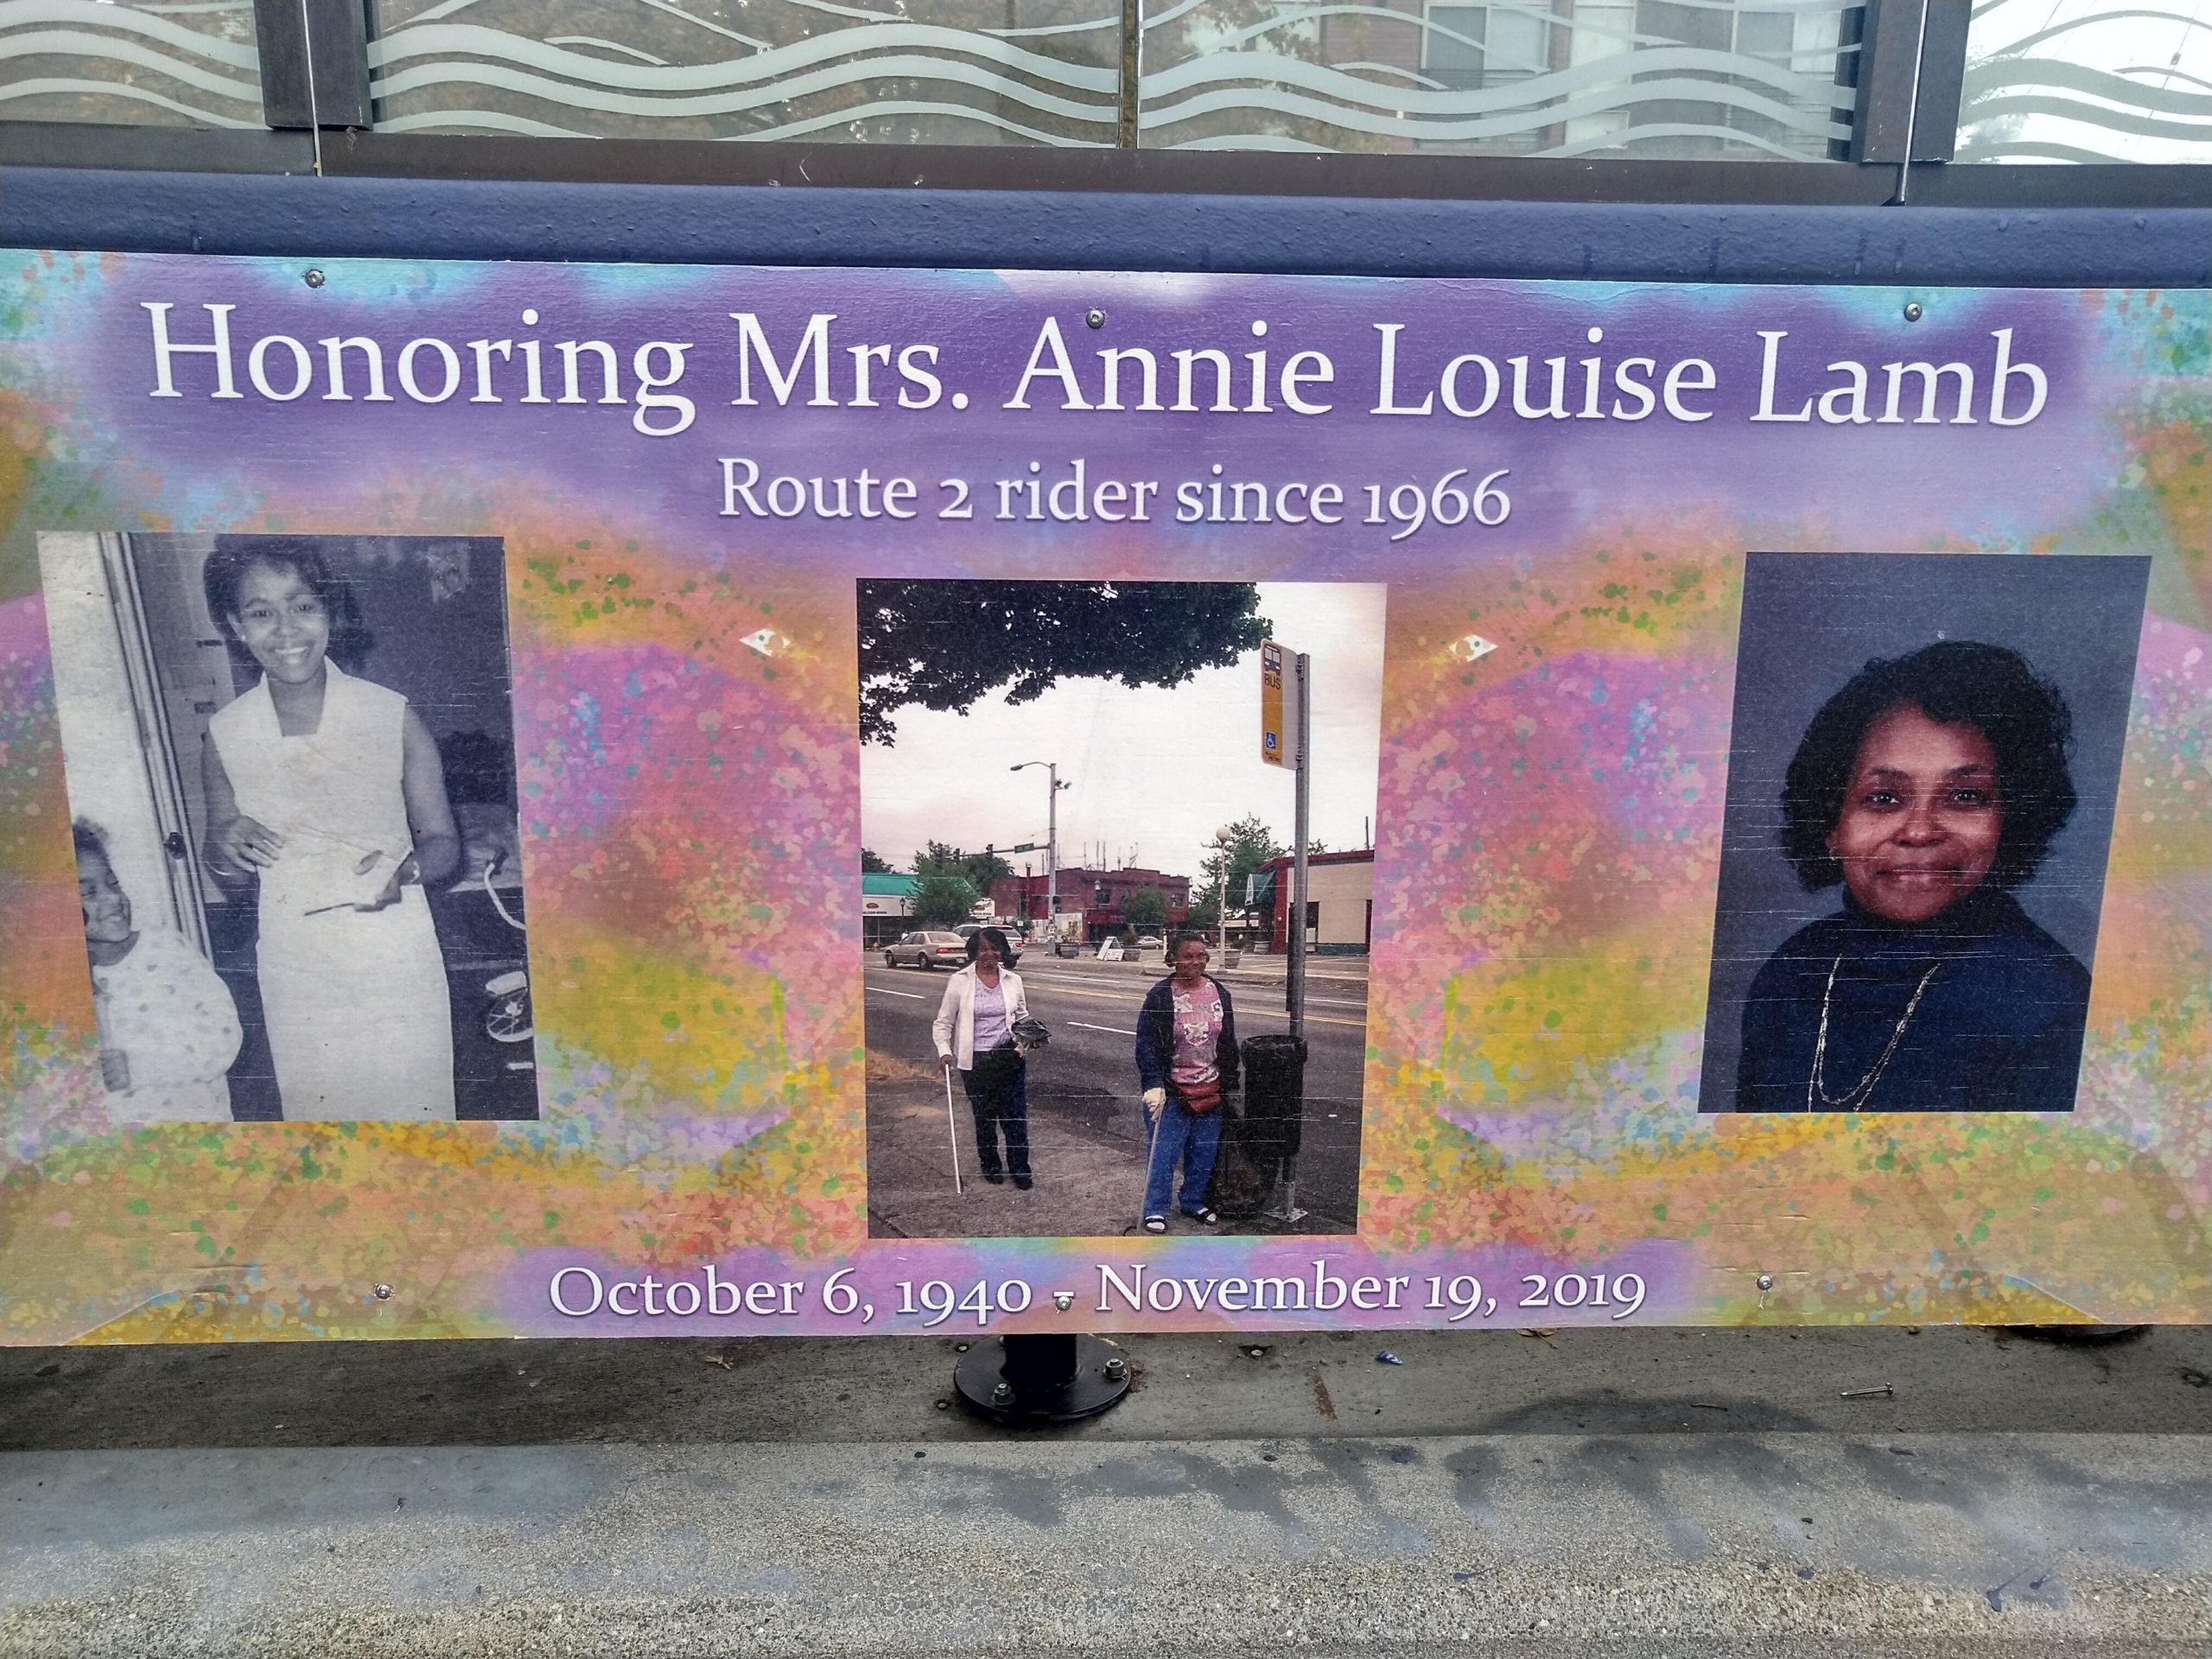 A bus shelter with a mural honoring Annie Lamb